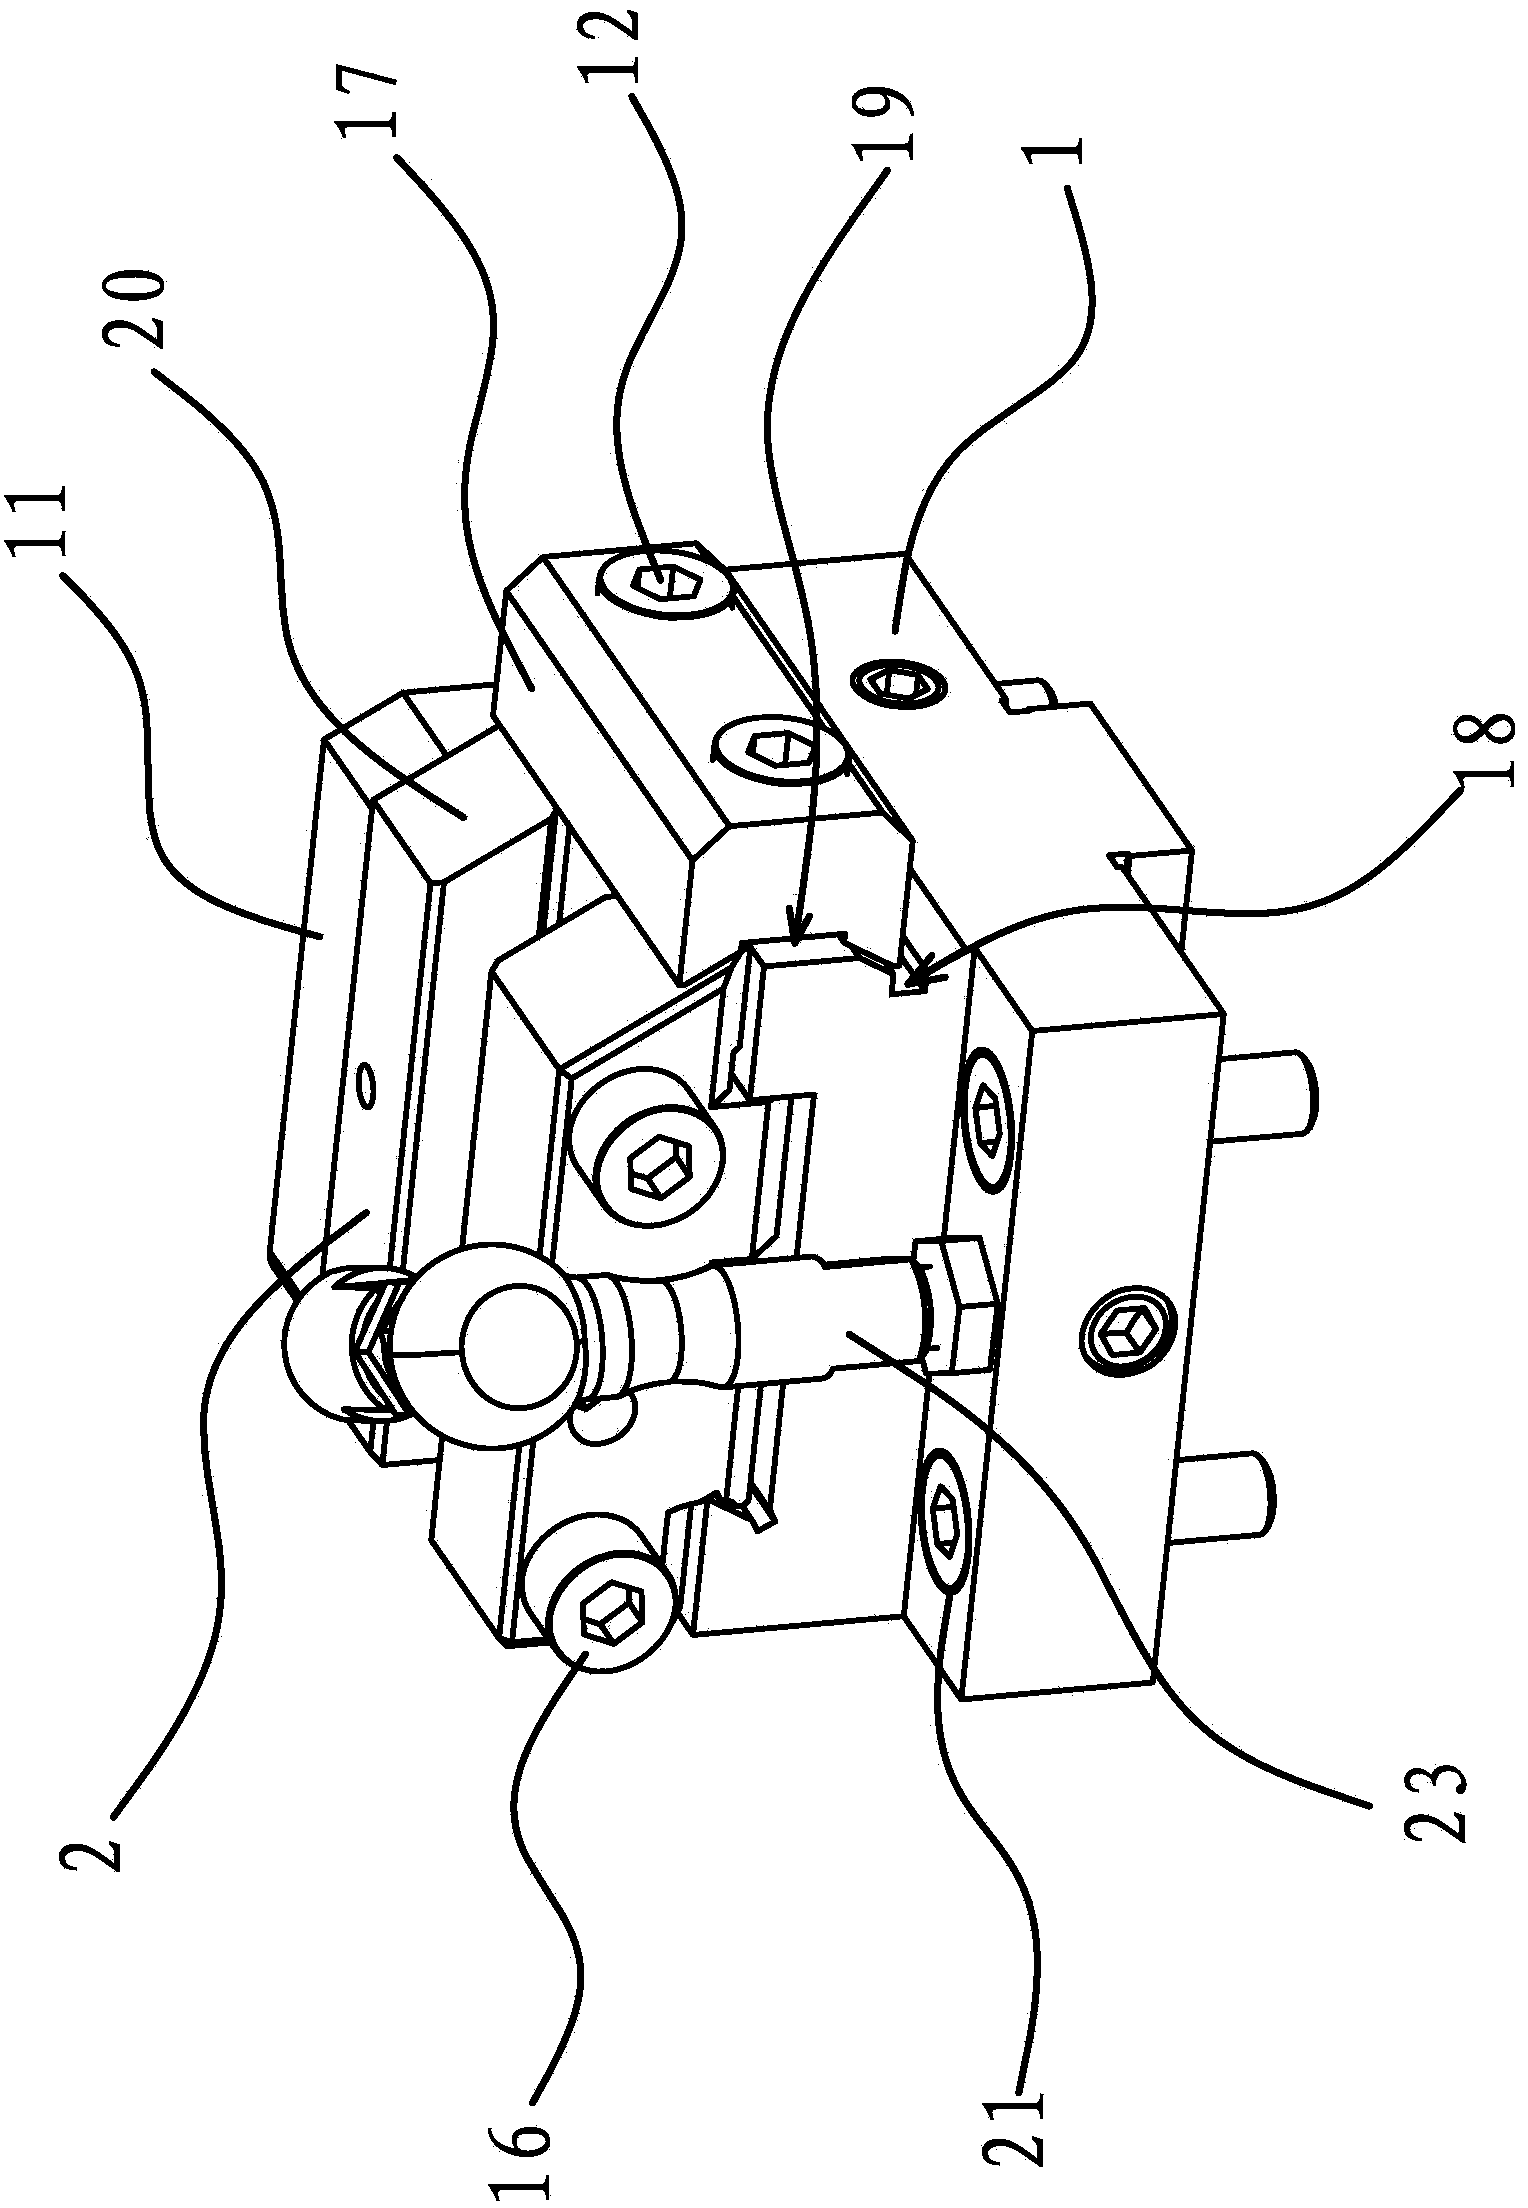 Detachable tool rest on numerically-controlled machine tool